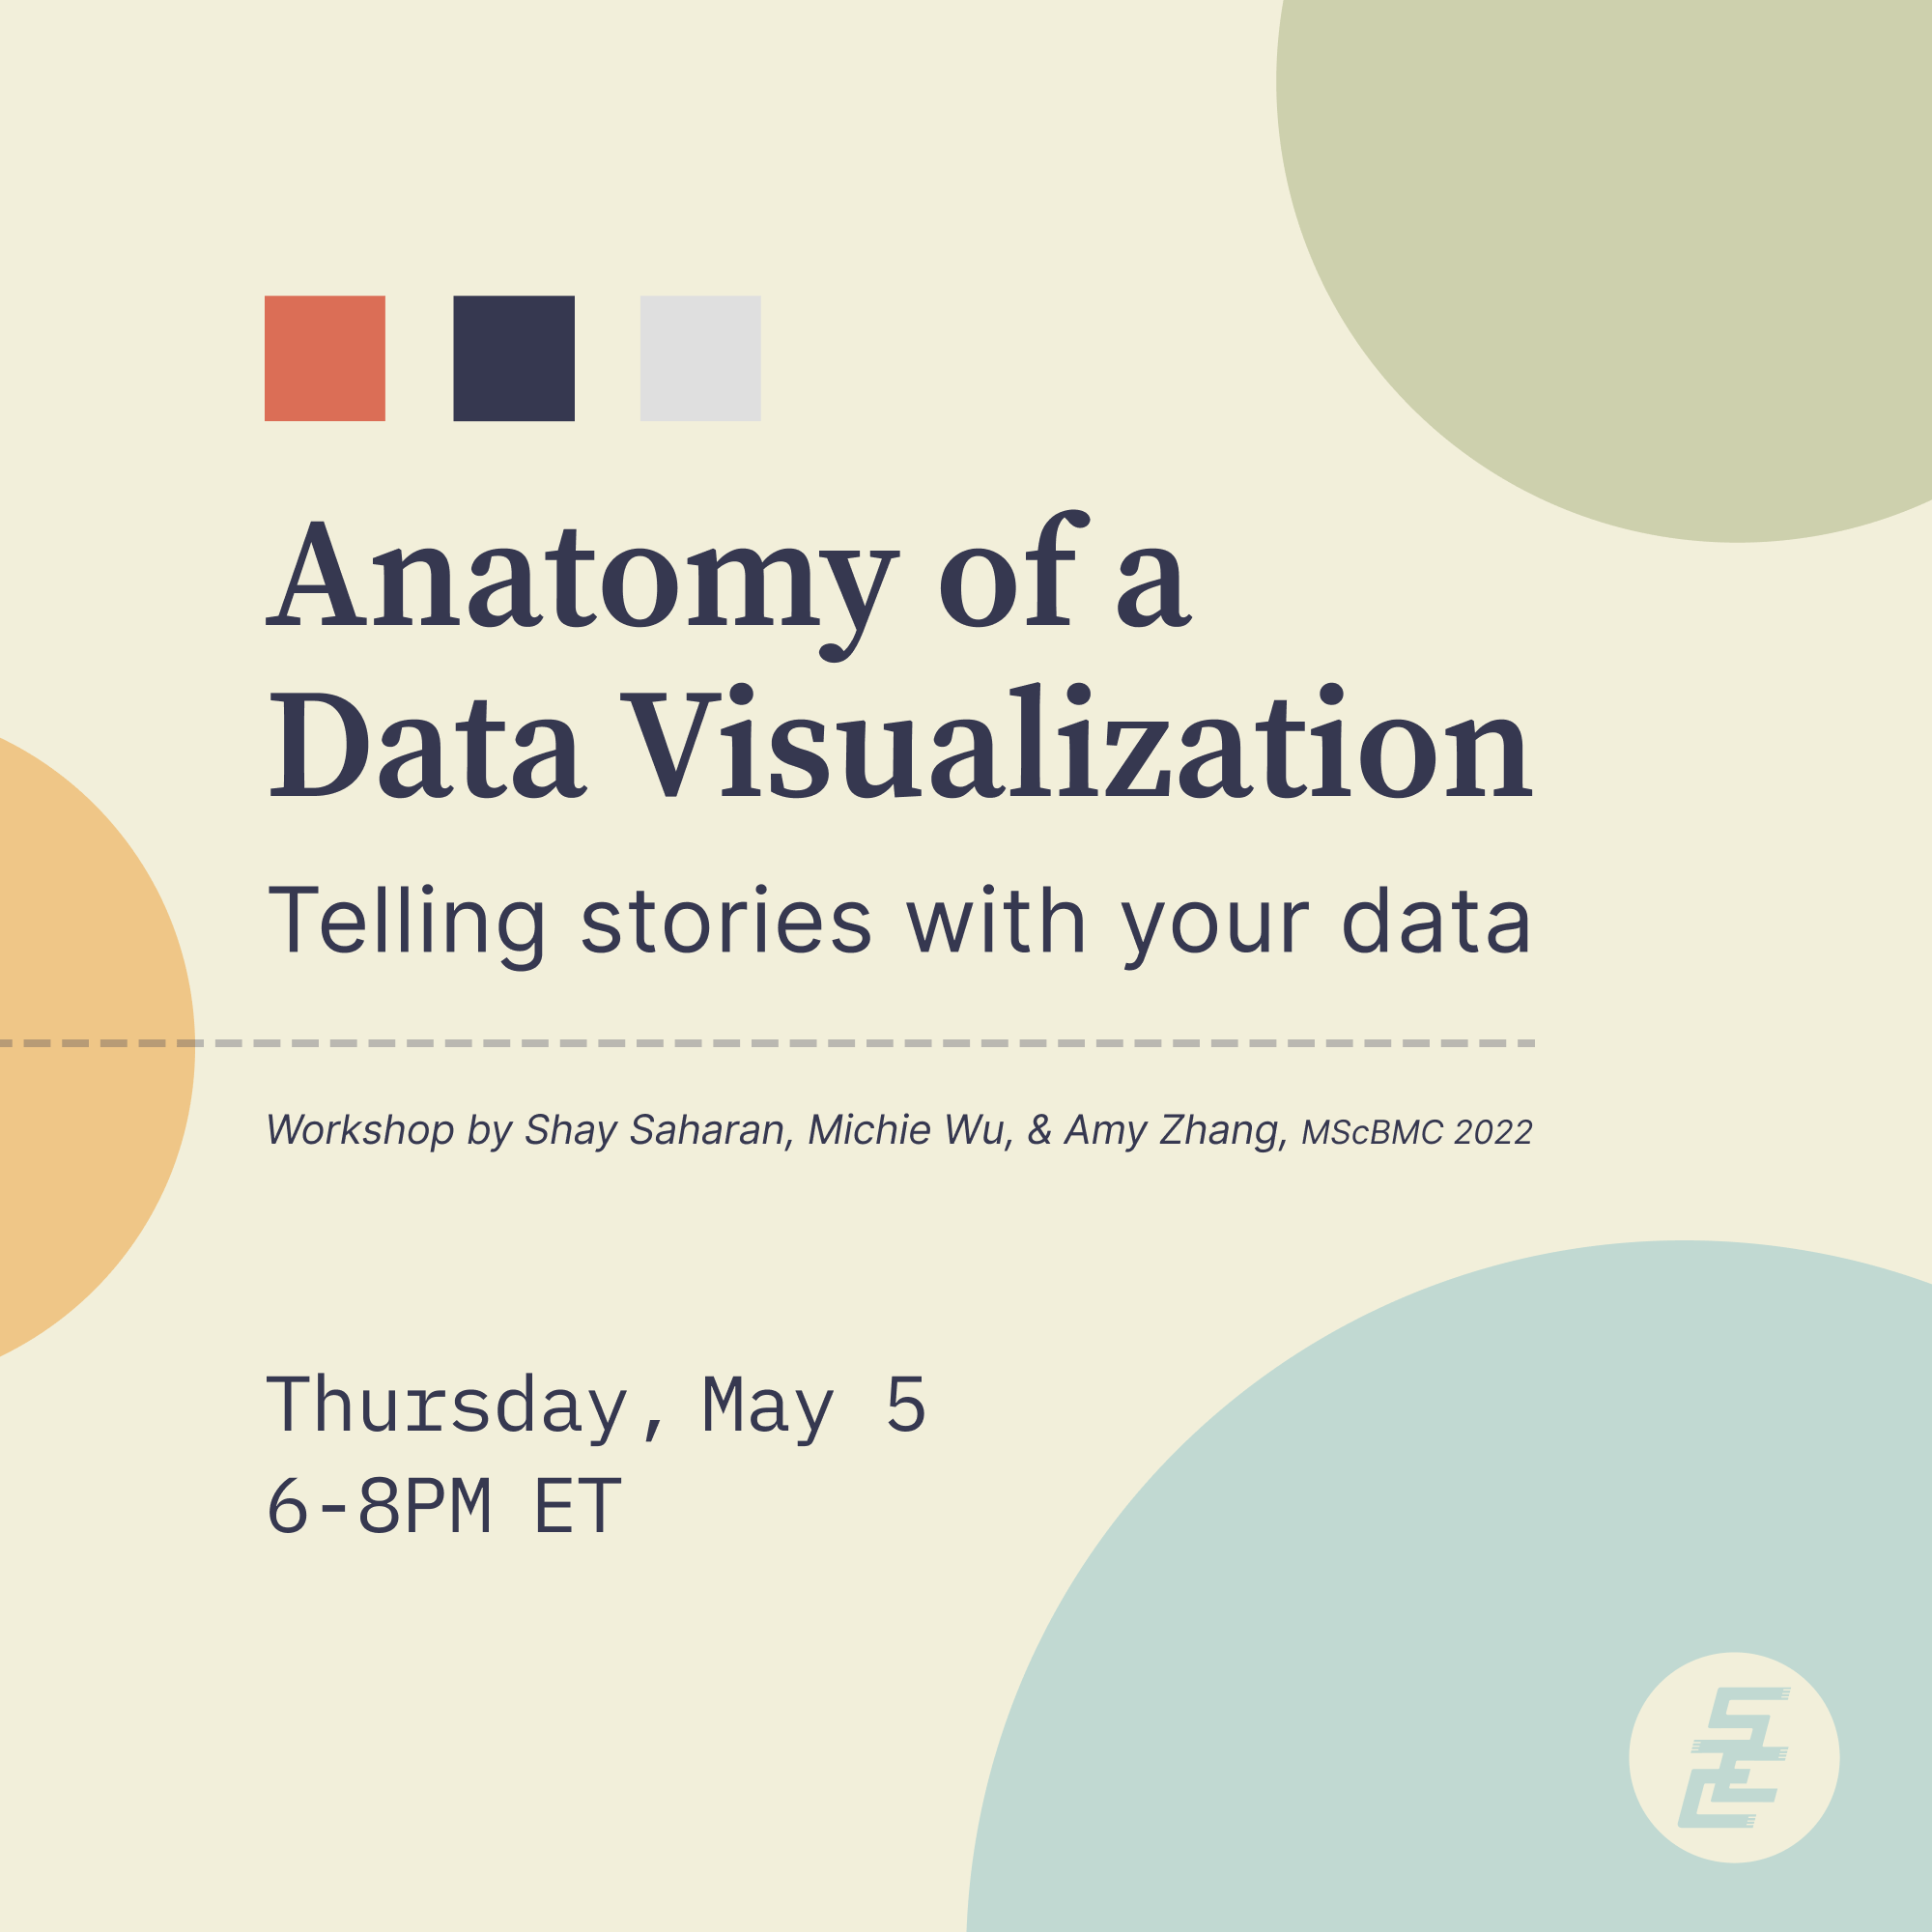 Anatomy of a Data Visualization: Telling stories with your data. Workshop by Shay Saharan, Michie Wu, and Amy Zhang. Thursday, May 5 6:00 to 8:00PM ET. Hosted by the Science Communication Club. scicomm-data-visualization.eventbrite.ca